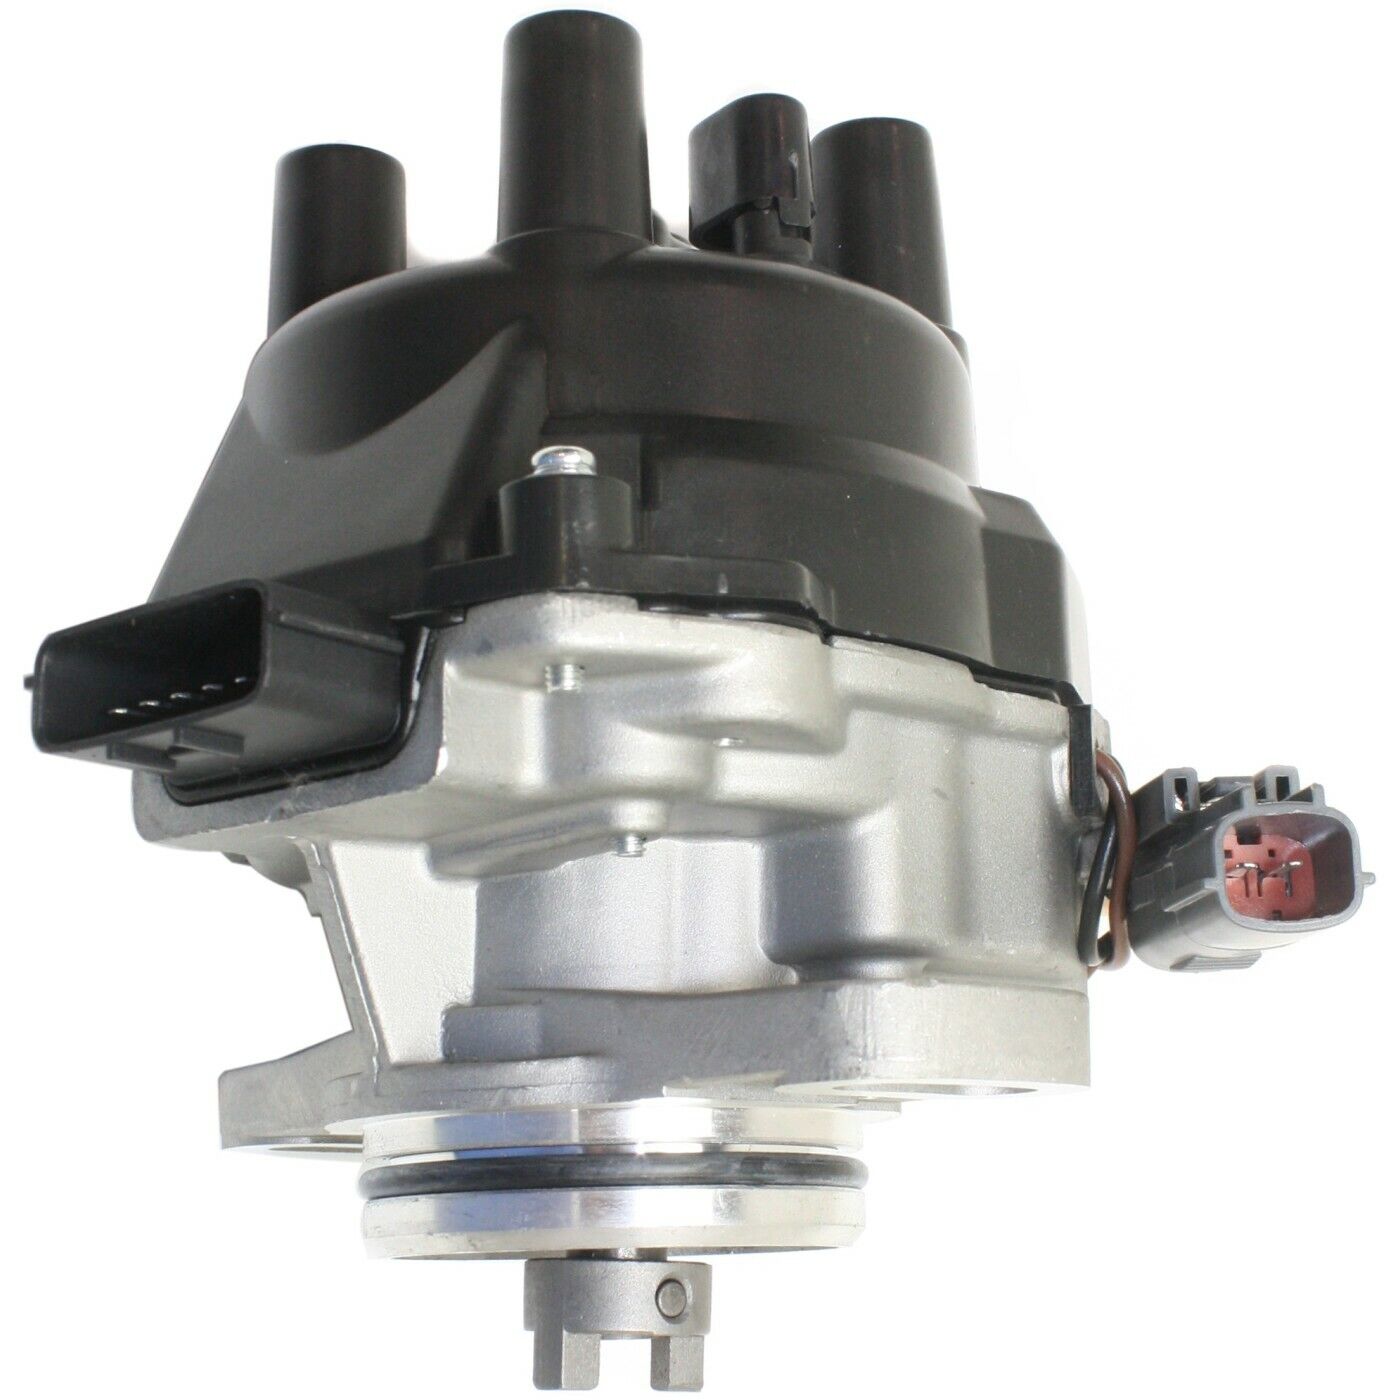 Distributor for 95-99 Nissan Sentra Blade type; Includes cap, module, and rotor